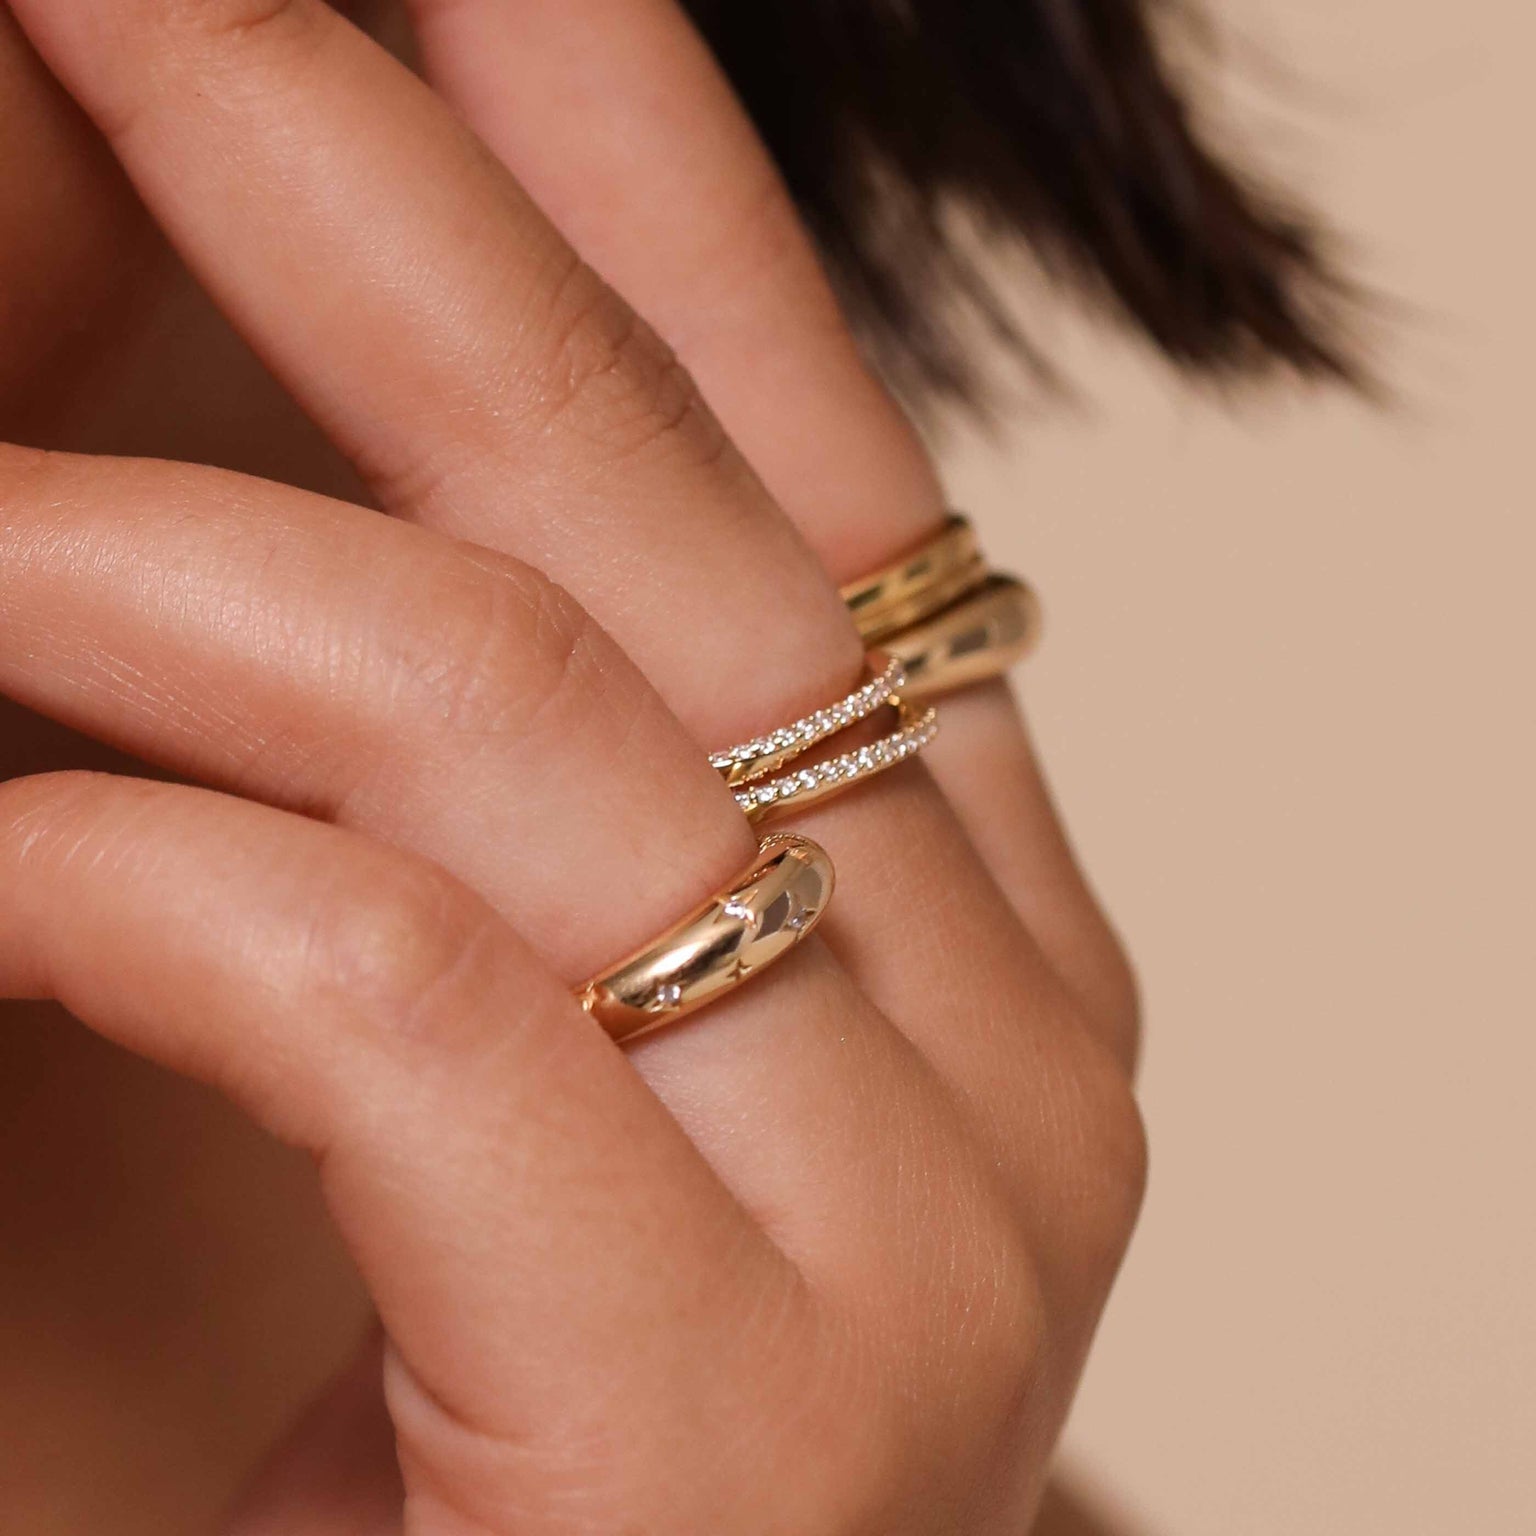 Cosmic Dome Ring in Gold worn layered with rings